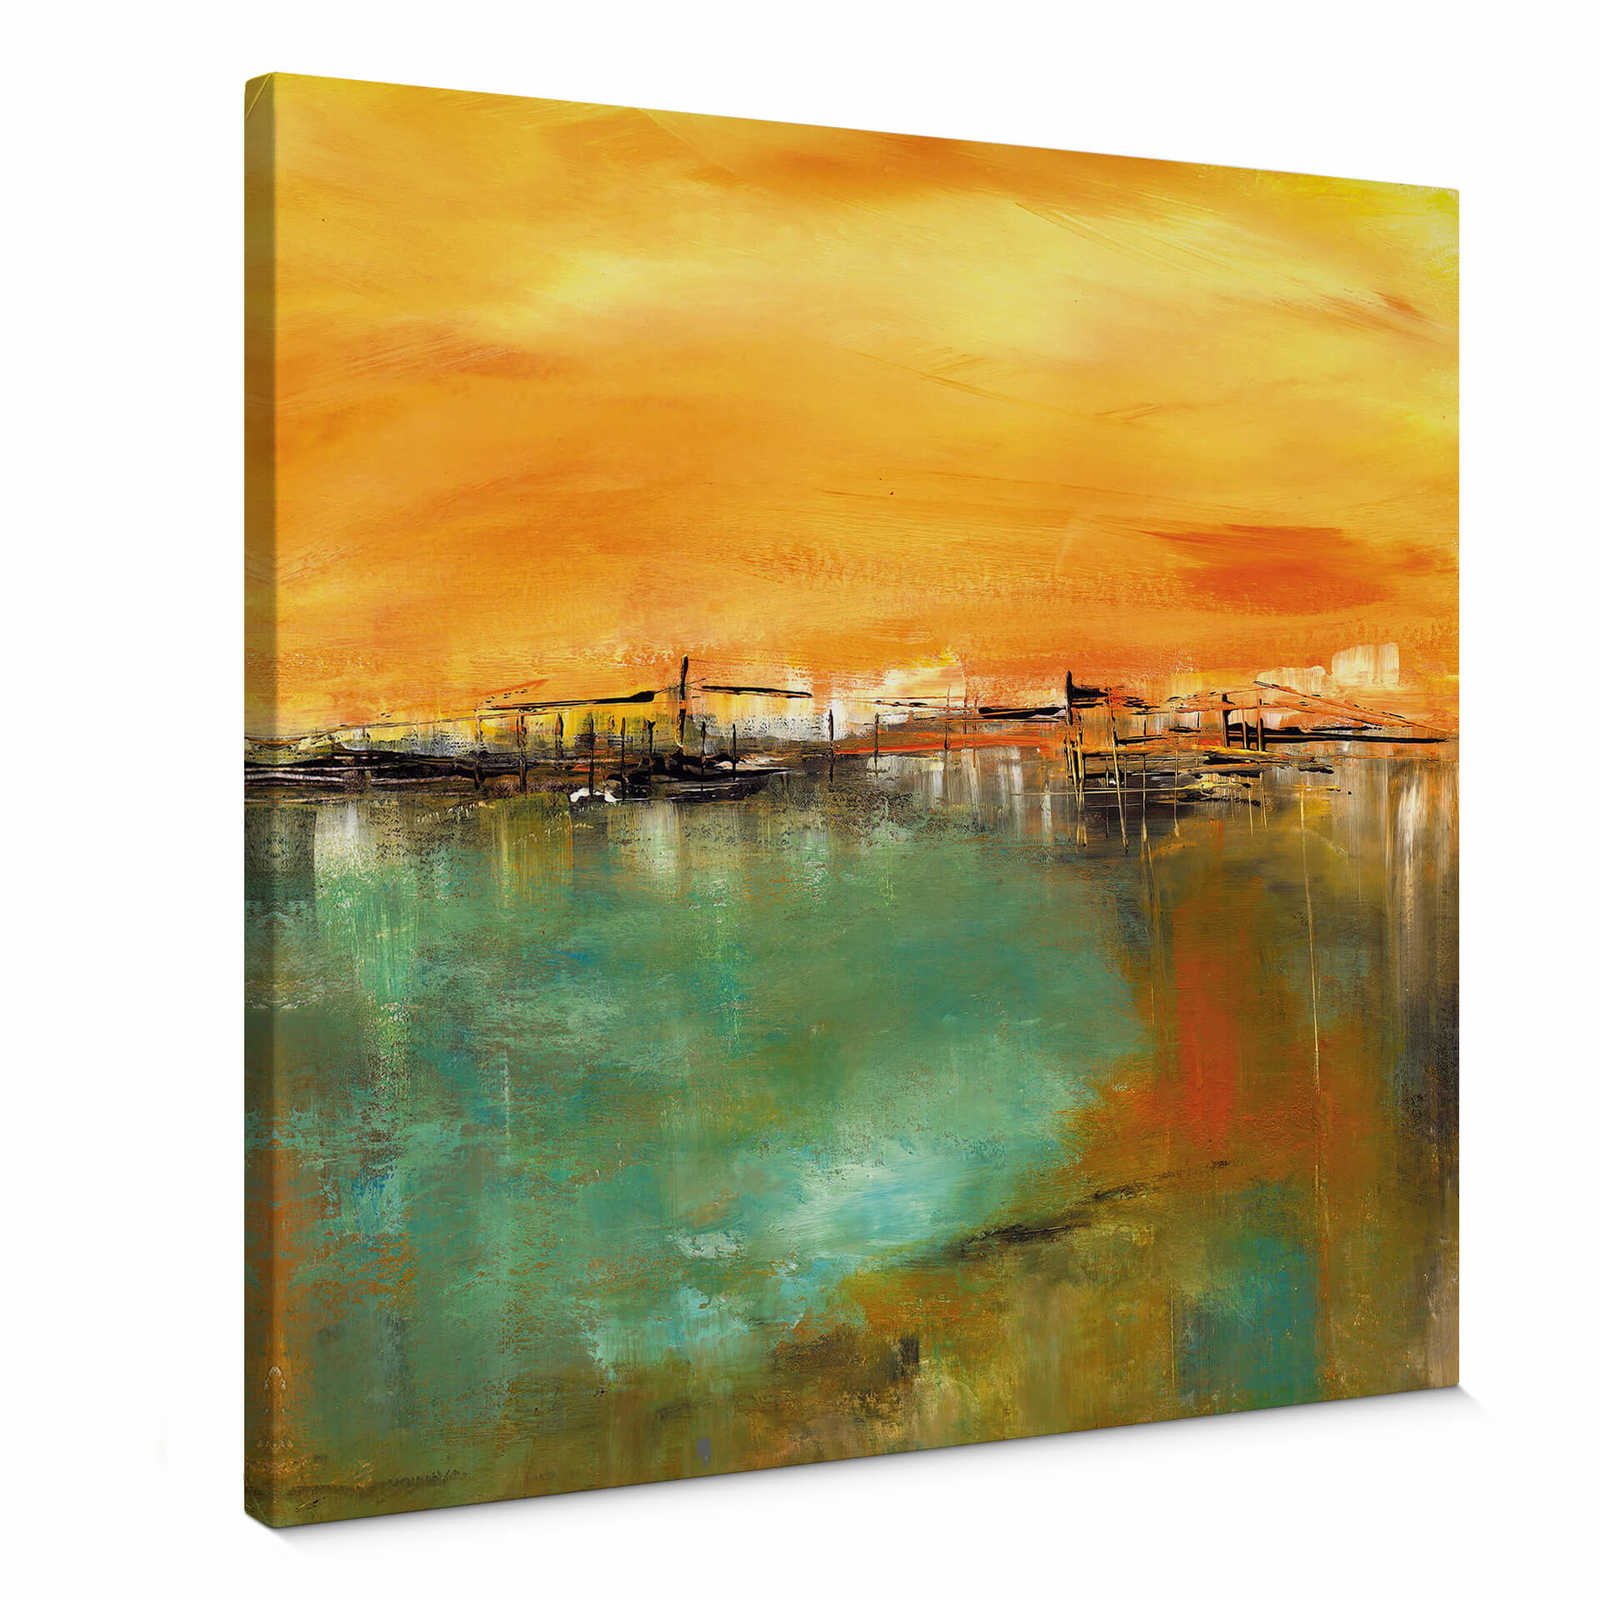         Square Canvas print abstract art by Niksic
    